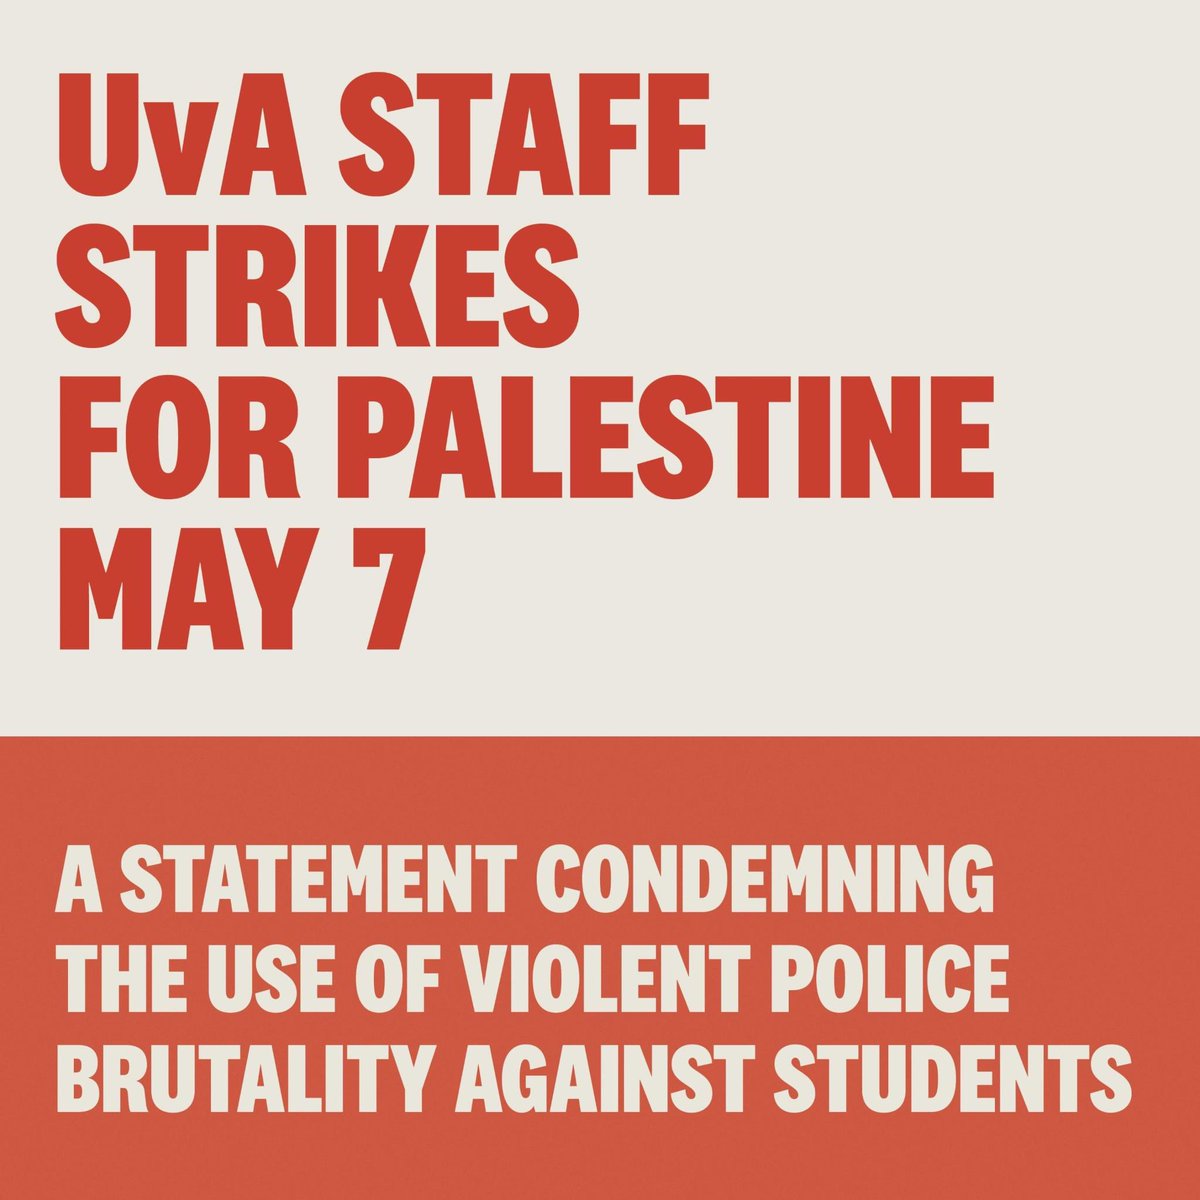 As Amsterdam and Europe slowly wake up… A statement concerning the police violence unleashed on the Gaza Solidarity Encampment at the Roeterseiland campus of the University of Amsterdam…